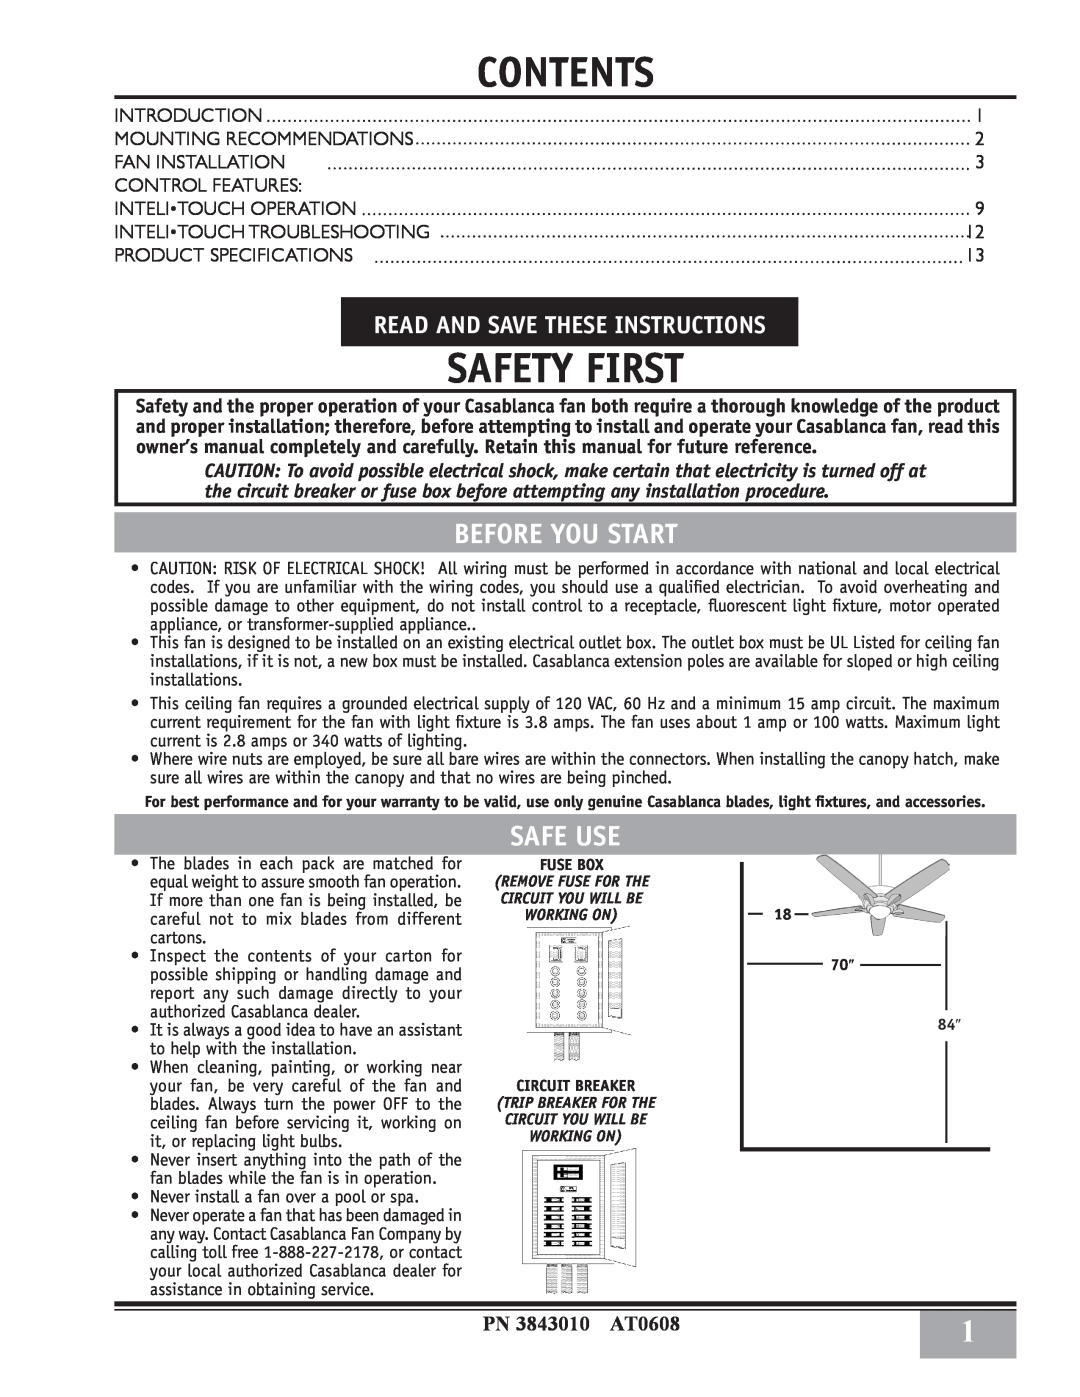 Casablanca Fan Company 38DHxxT specifications Before You Start, Safe Use, Read And Save These Instructions, Safety First 